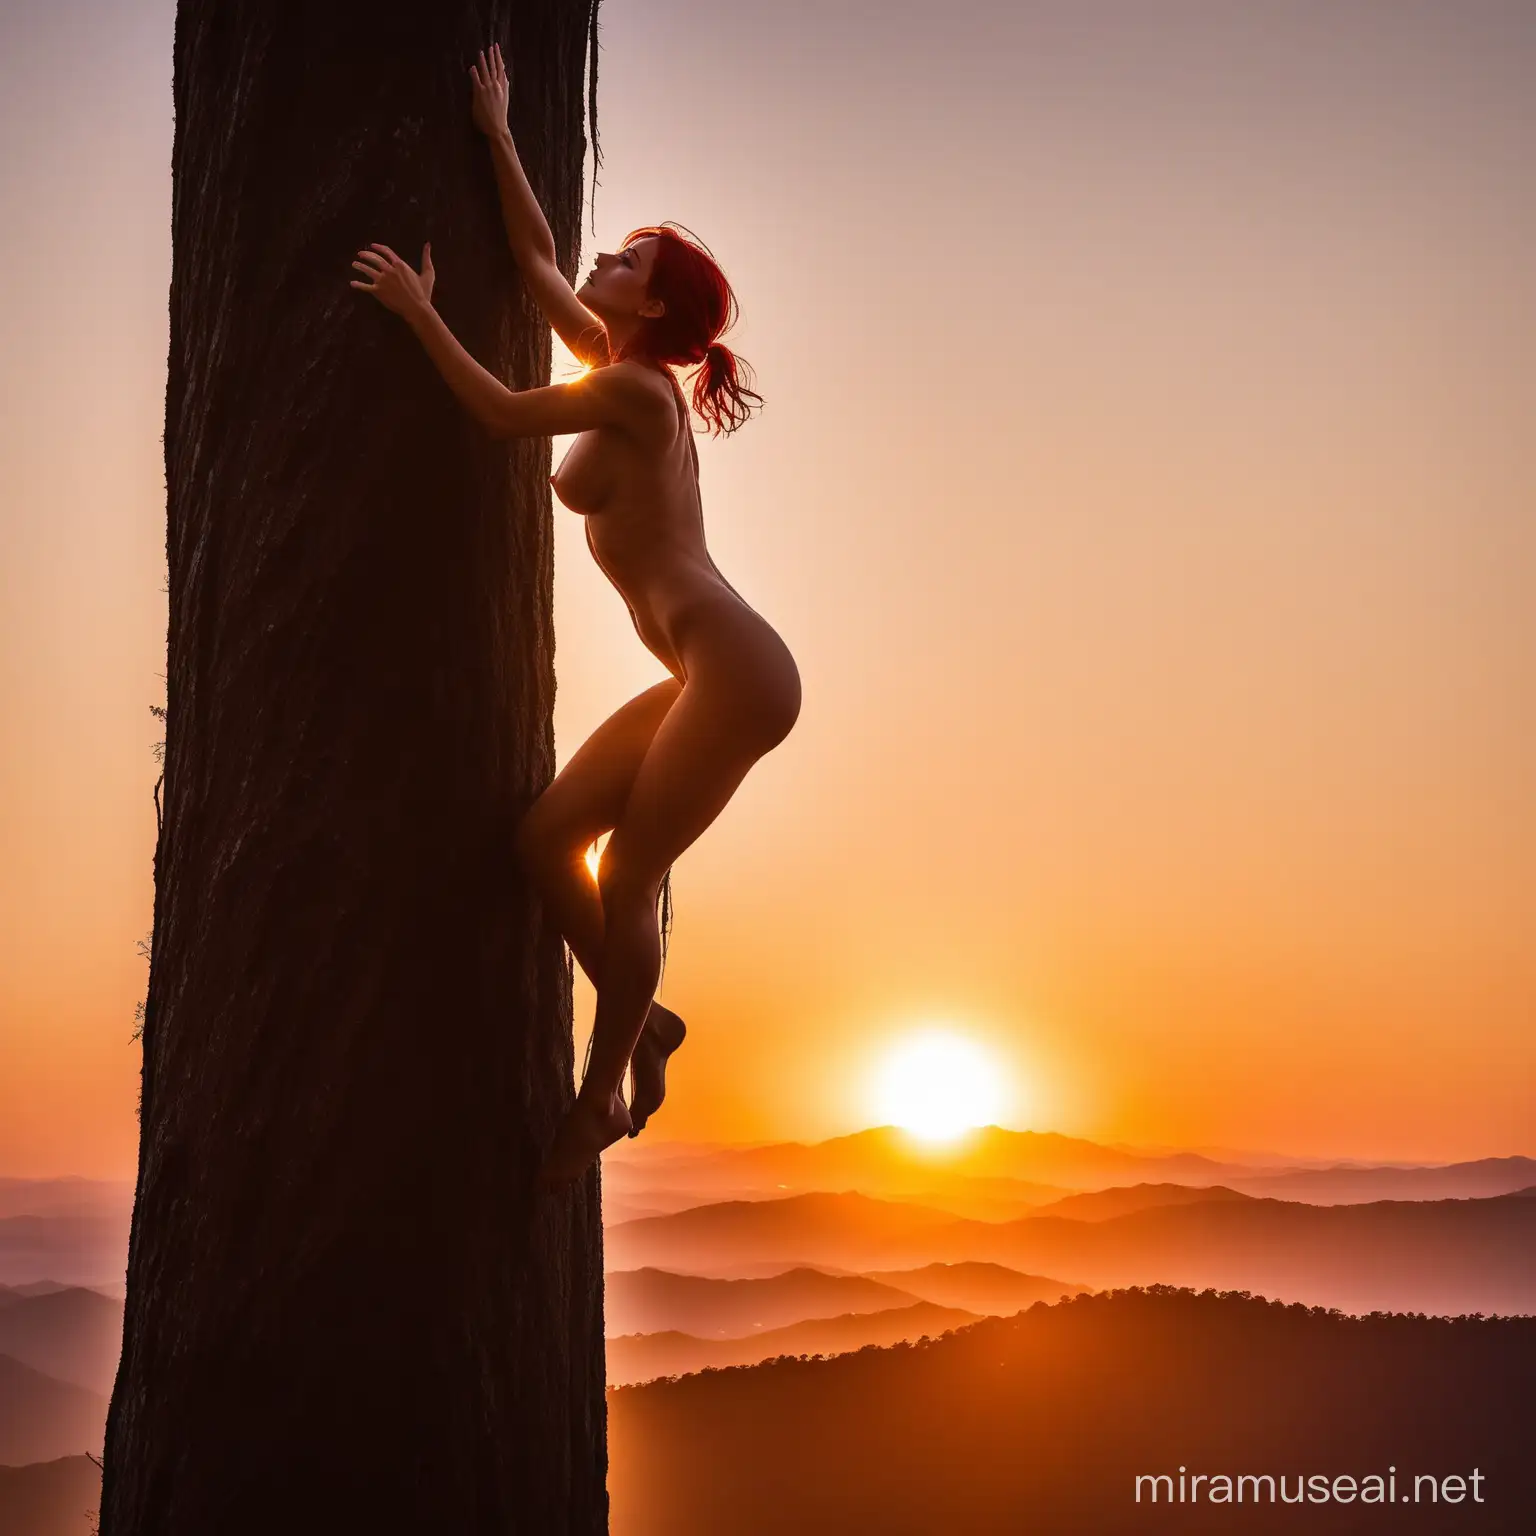 RedHaired Woman Climbing in Natural Landscape at Sunset